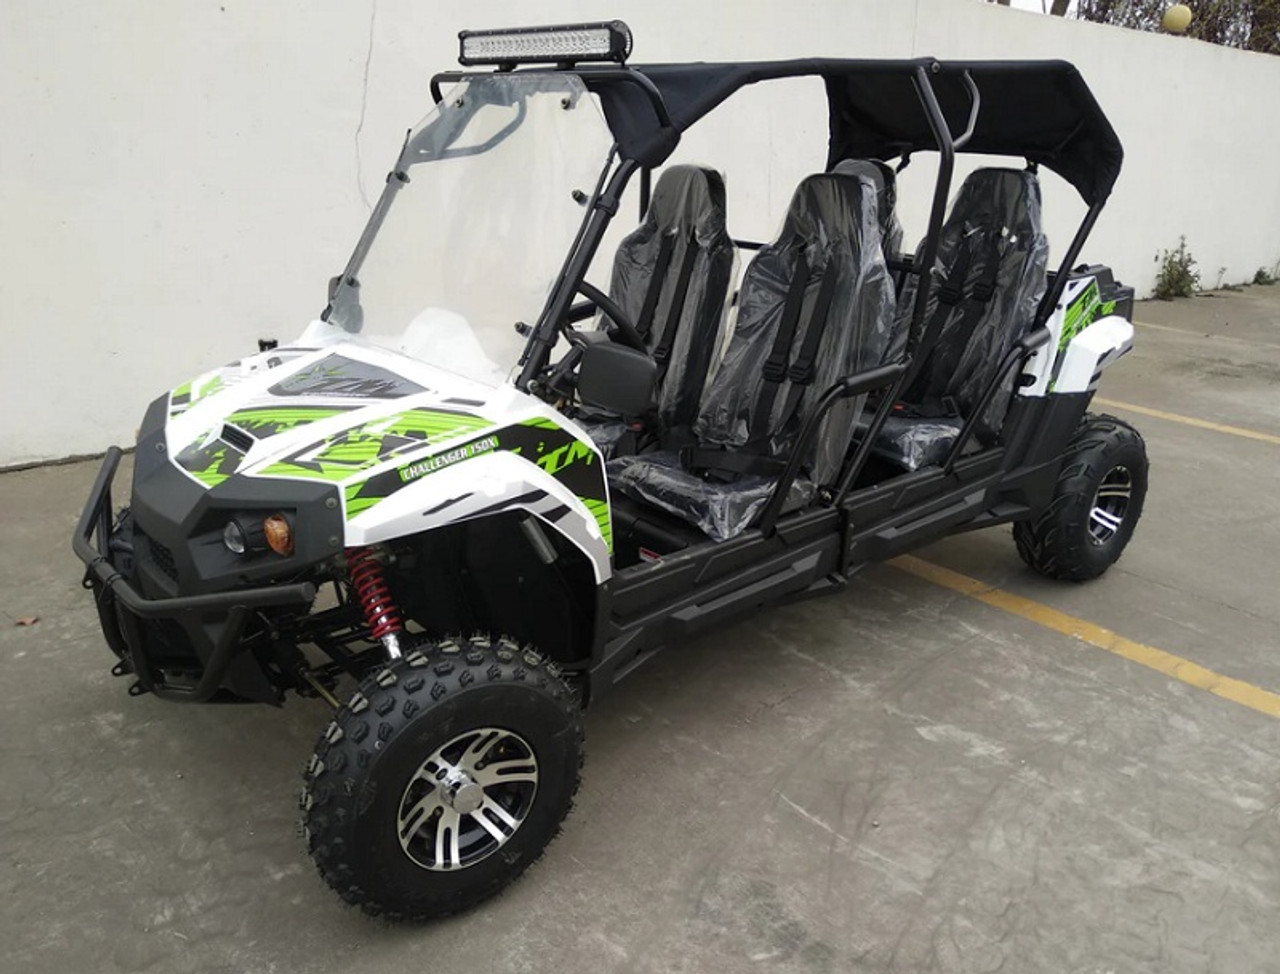 TrailMaster Challenger 4-200EX UTV side-by-side Great Family Fun, Adjustable seat and steering Wheel, Throttle Limiter